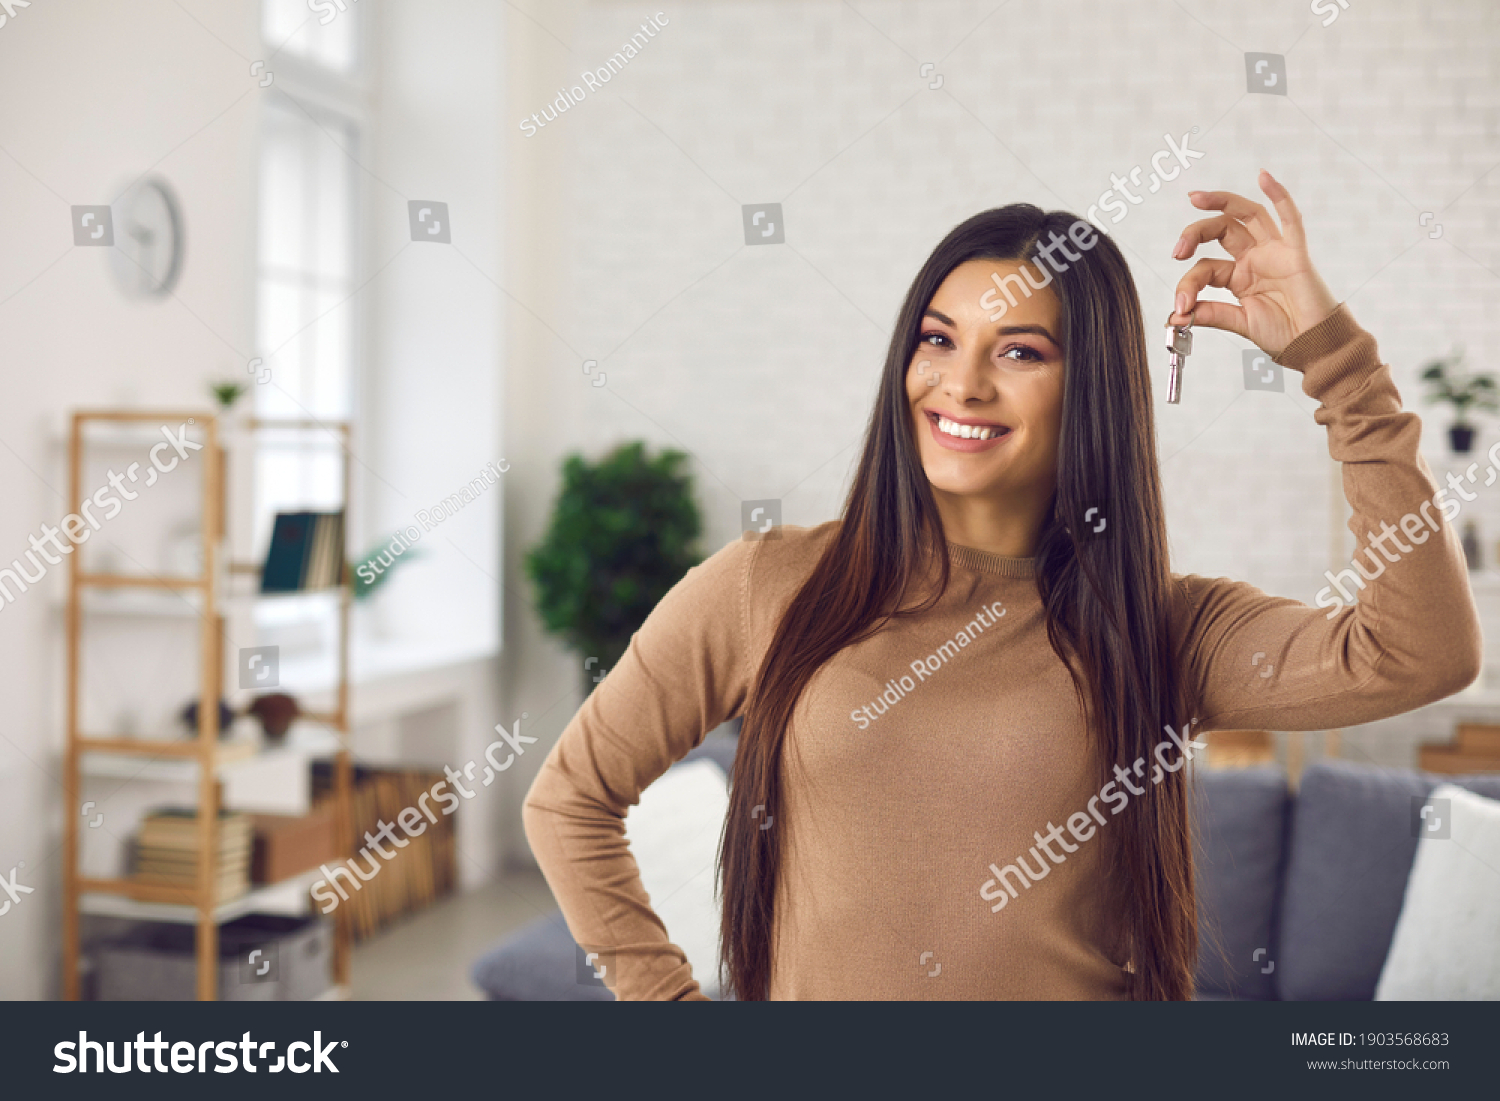 Happy woman holding keys to new home, looking at camera and smiling. Portrait of first time buyer, house owner, apartment renter, flat tenant or landlady. Moving day and buying own property concept #1903568683